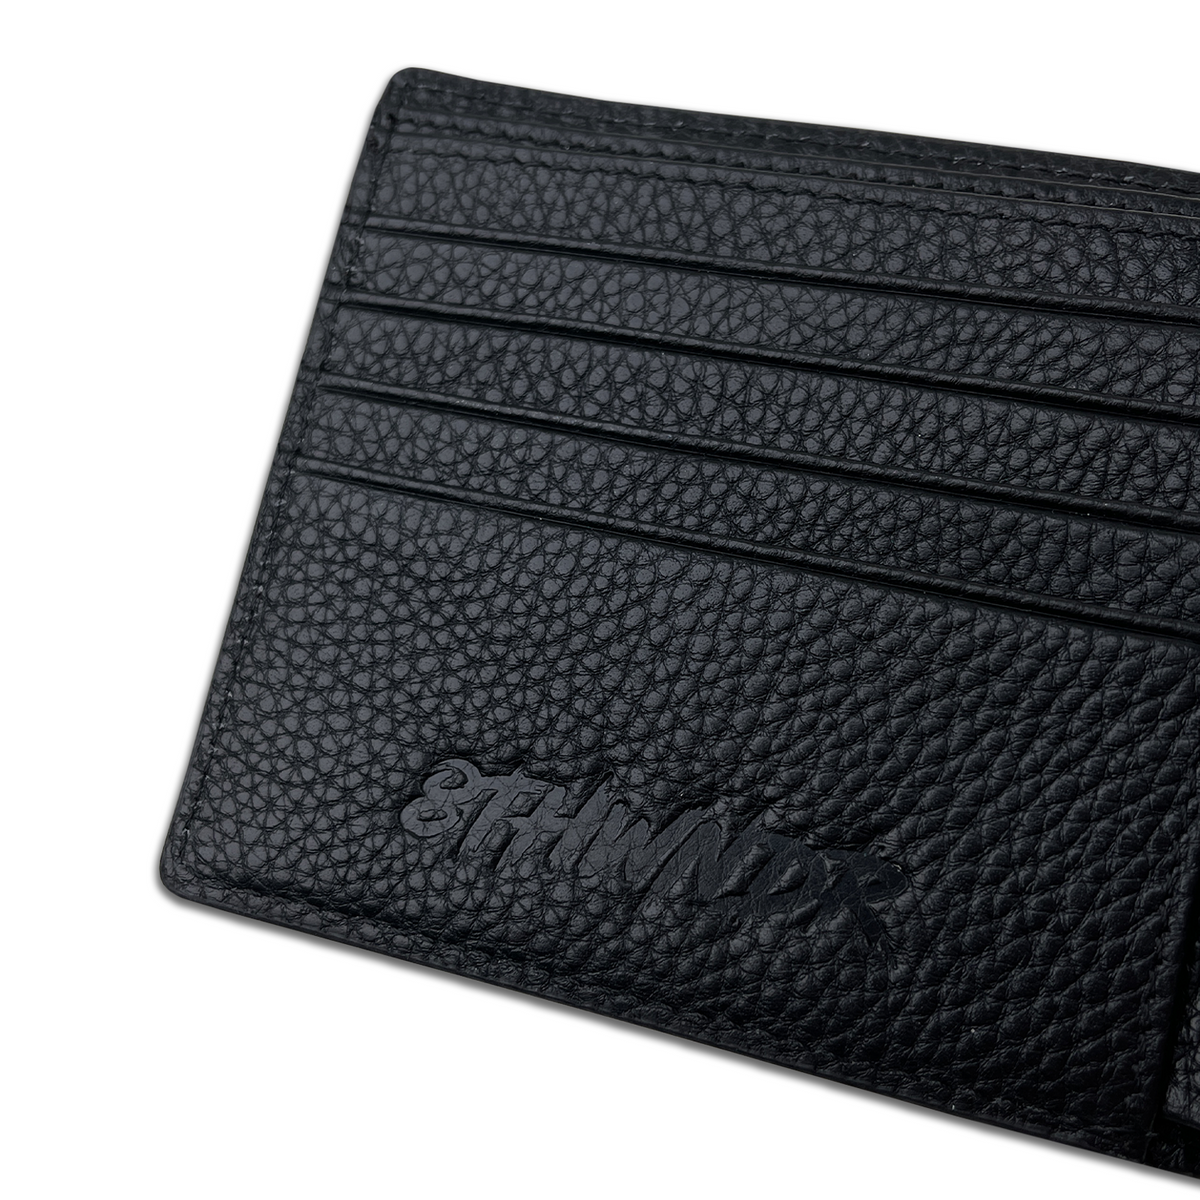 ALL OVER 8W EMBOSSED WALLET